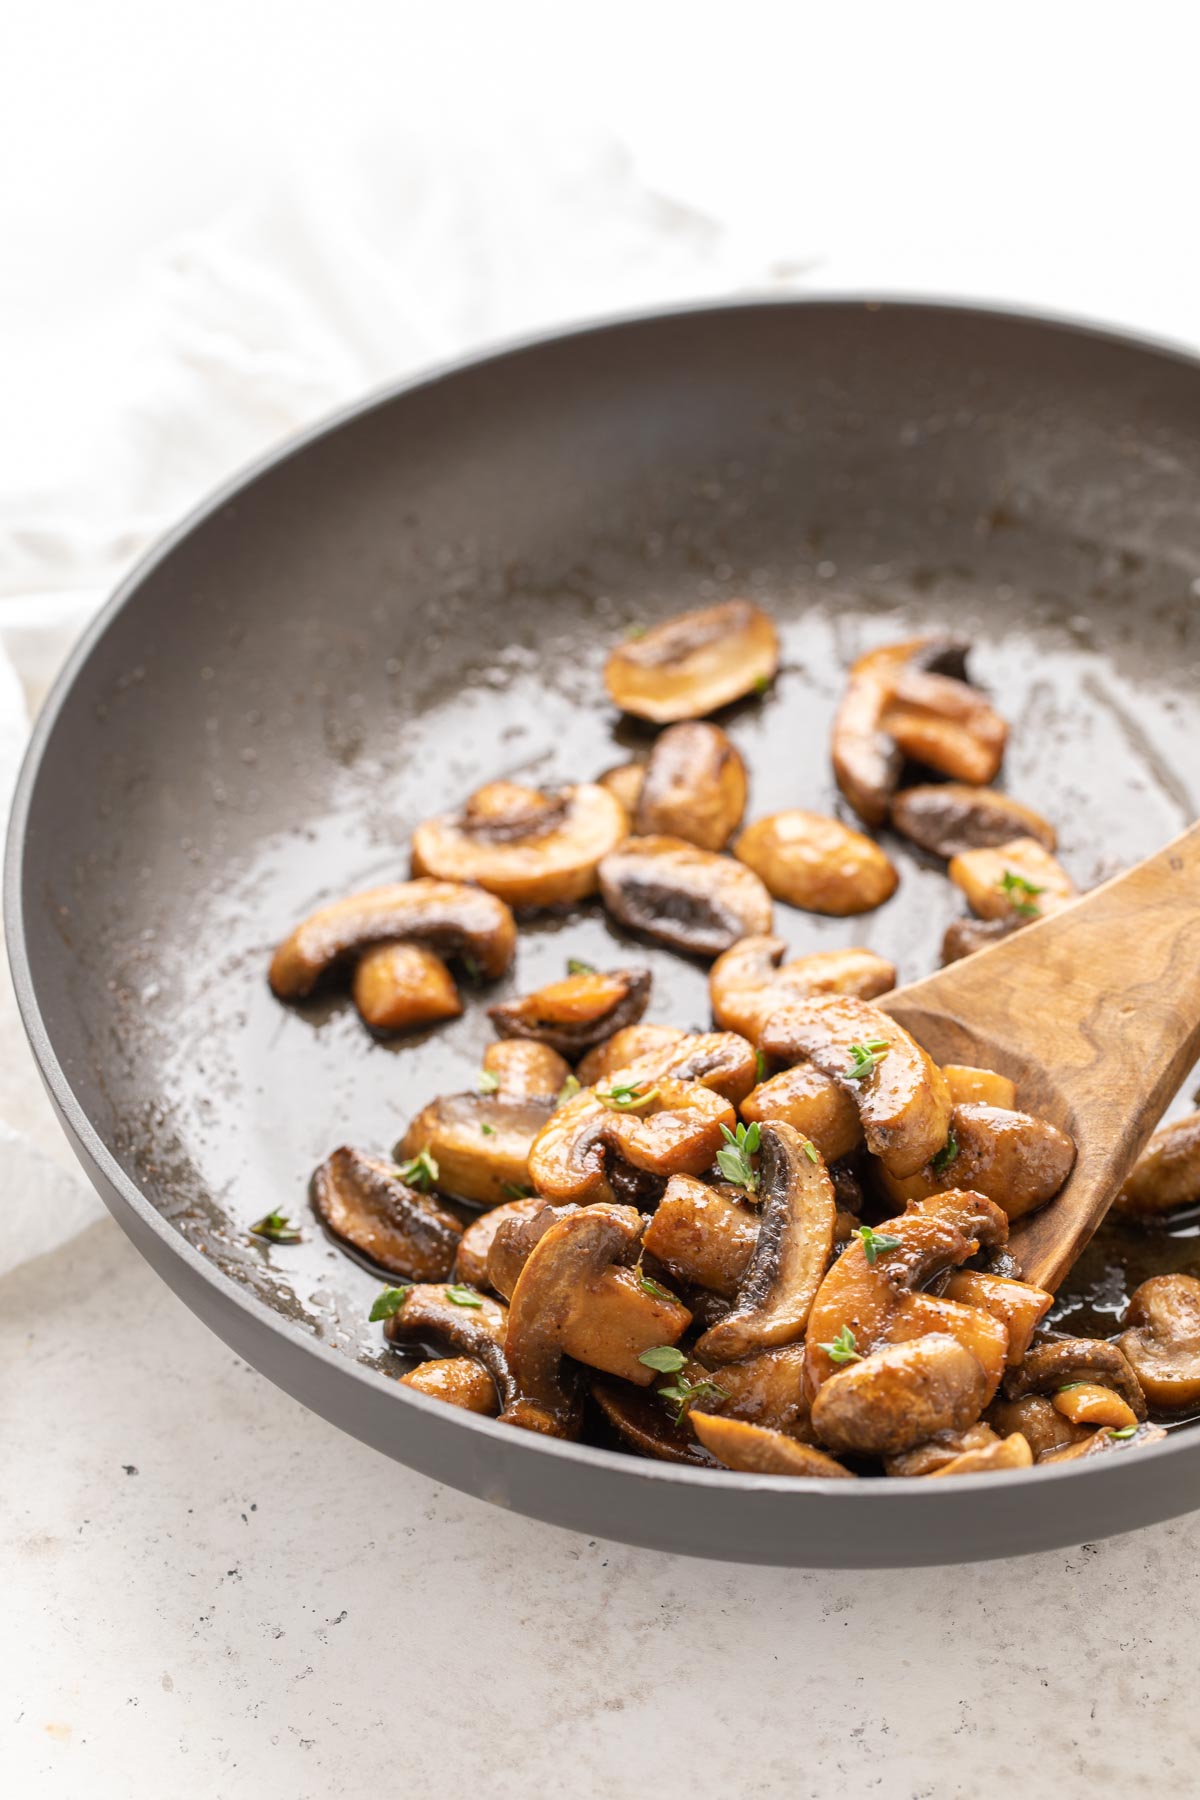 Closeup view of a wooden spoon spooning sauteed mushrooms in a skillet.